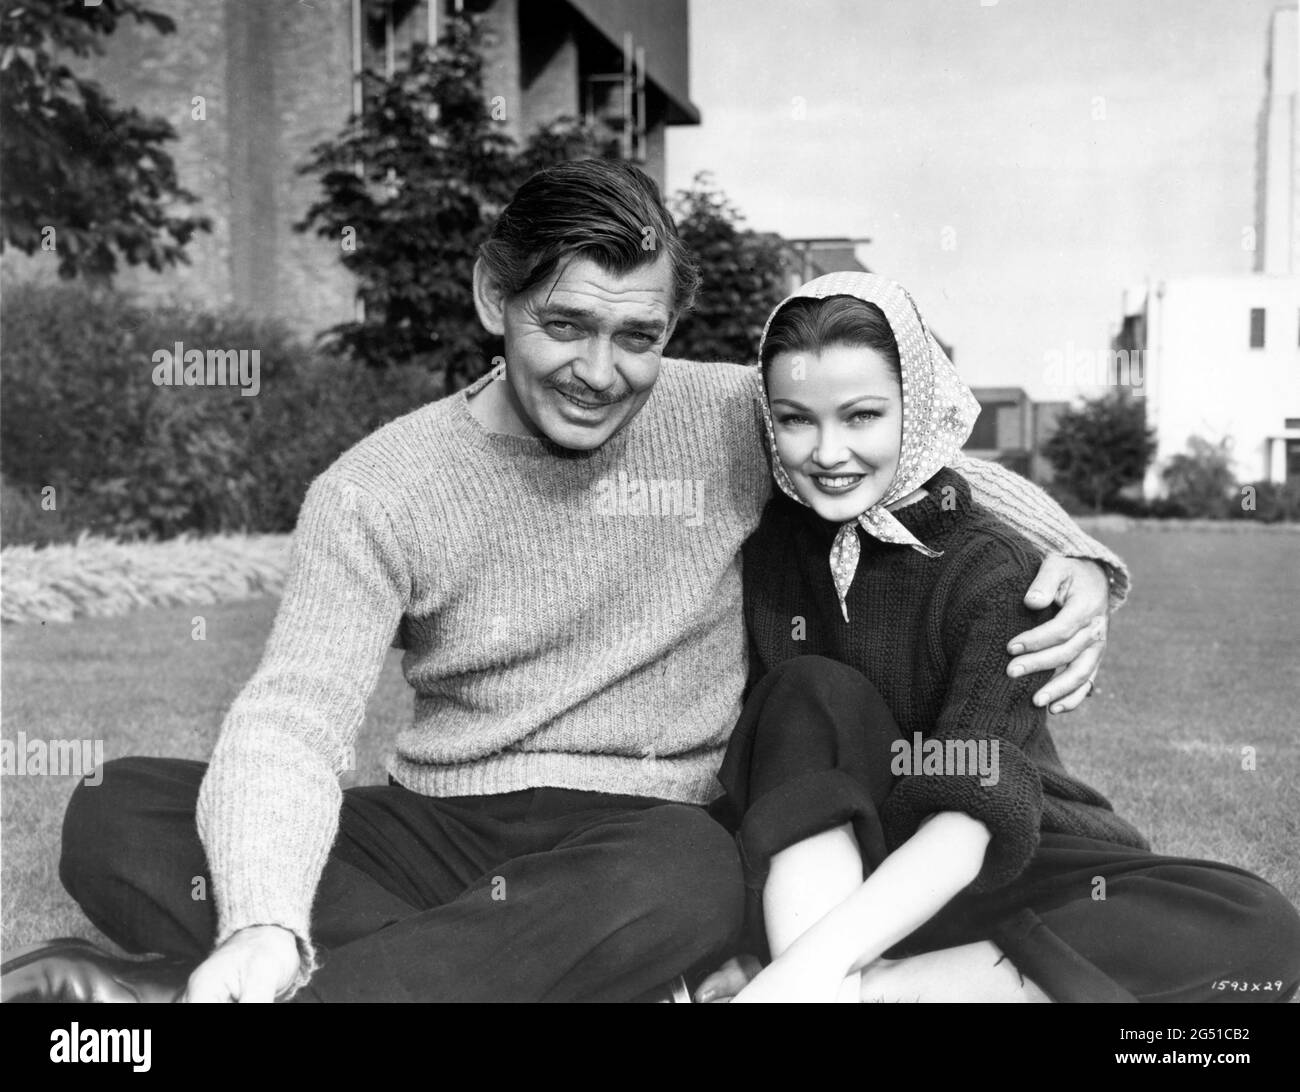 CLARK GABLE and GENE TIERNEY candid portrait at MGM British Studios at Boreham Wood during filming of NEVER LET ME GO 1953 director DELMER DAVES from novel Come The Dawn by Paul Winterton producer Clarence Brown Metro Goldwyn Mayer Stock Photo